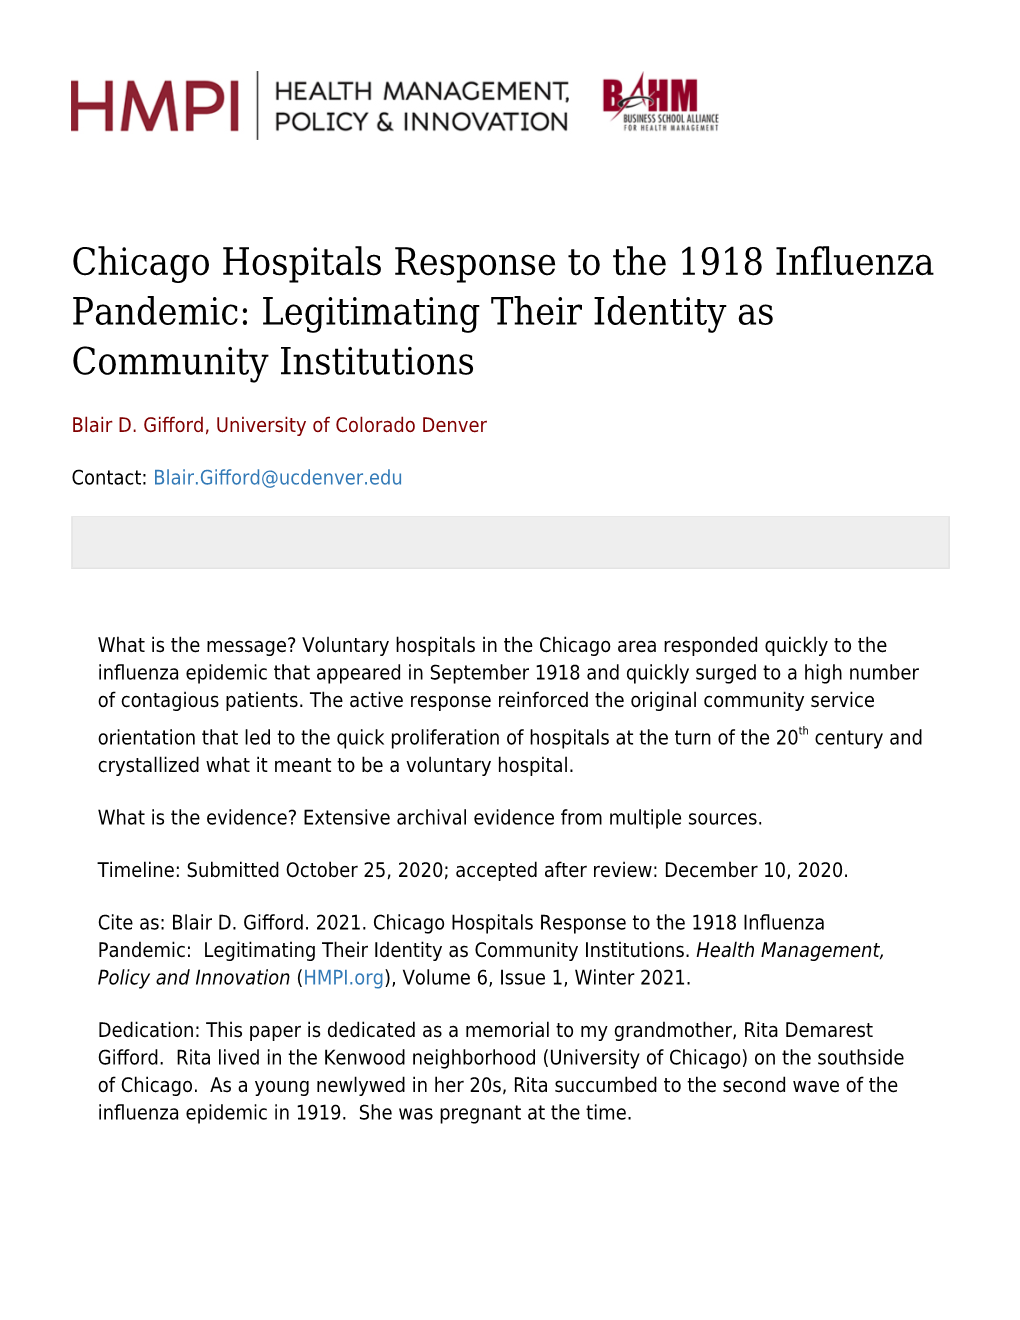 Chicago Hospitals Response to the 1918 Influenza Pandemic: Legitimating Their Identity As Community Institutions